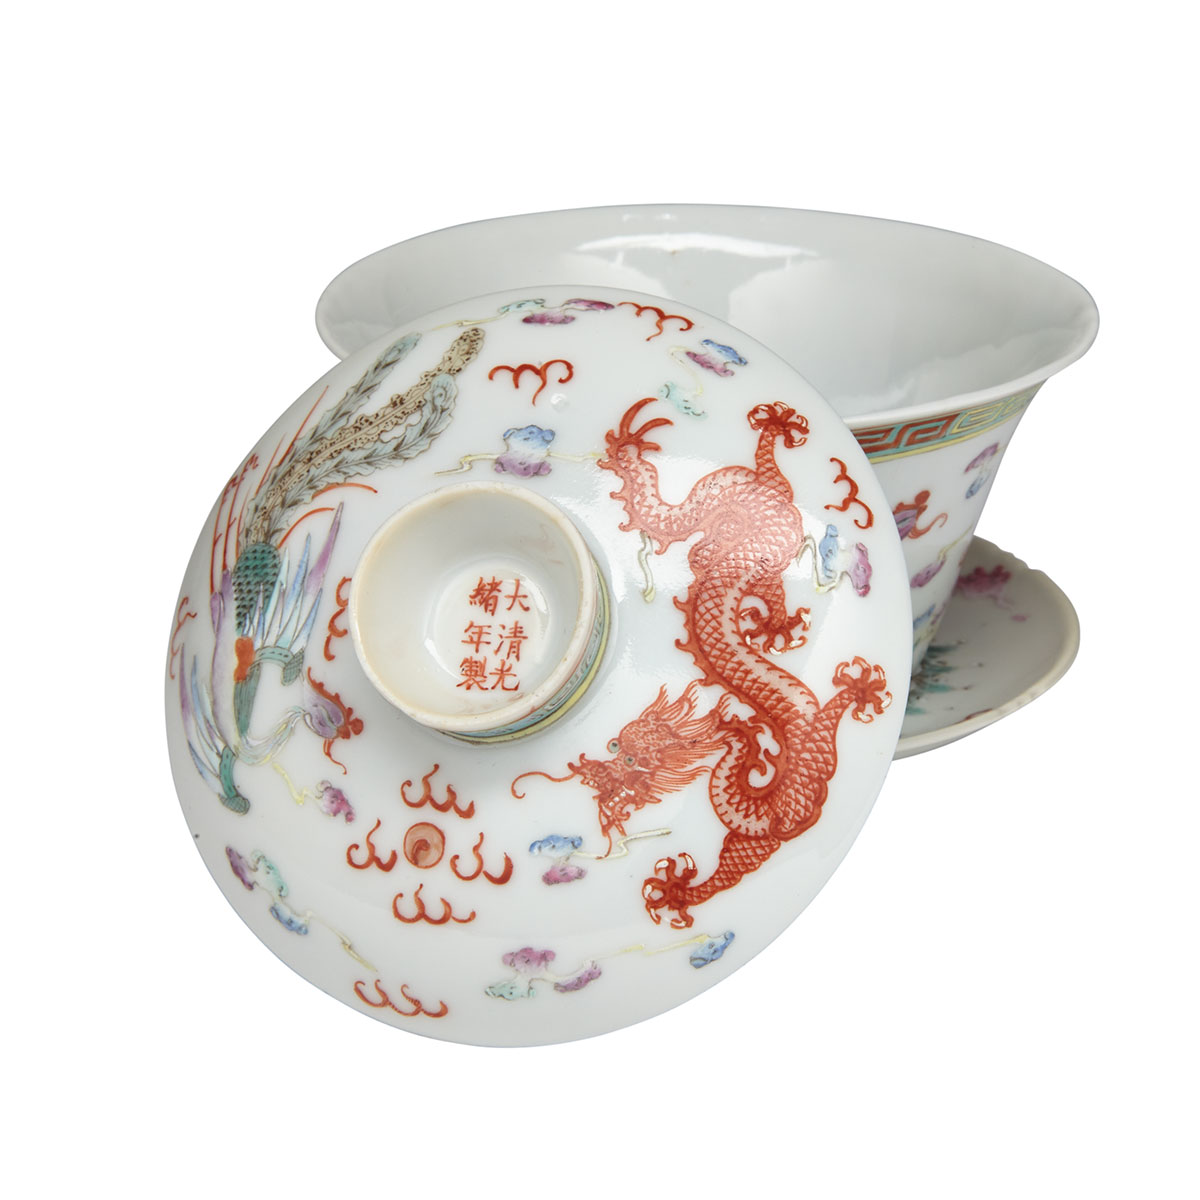 Famille Rose Three-Piece ‘Dragon and Phoenix’ Tea Cup, Guangxu Mark and Period (1875-1908)